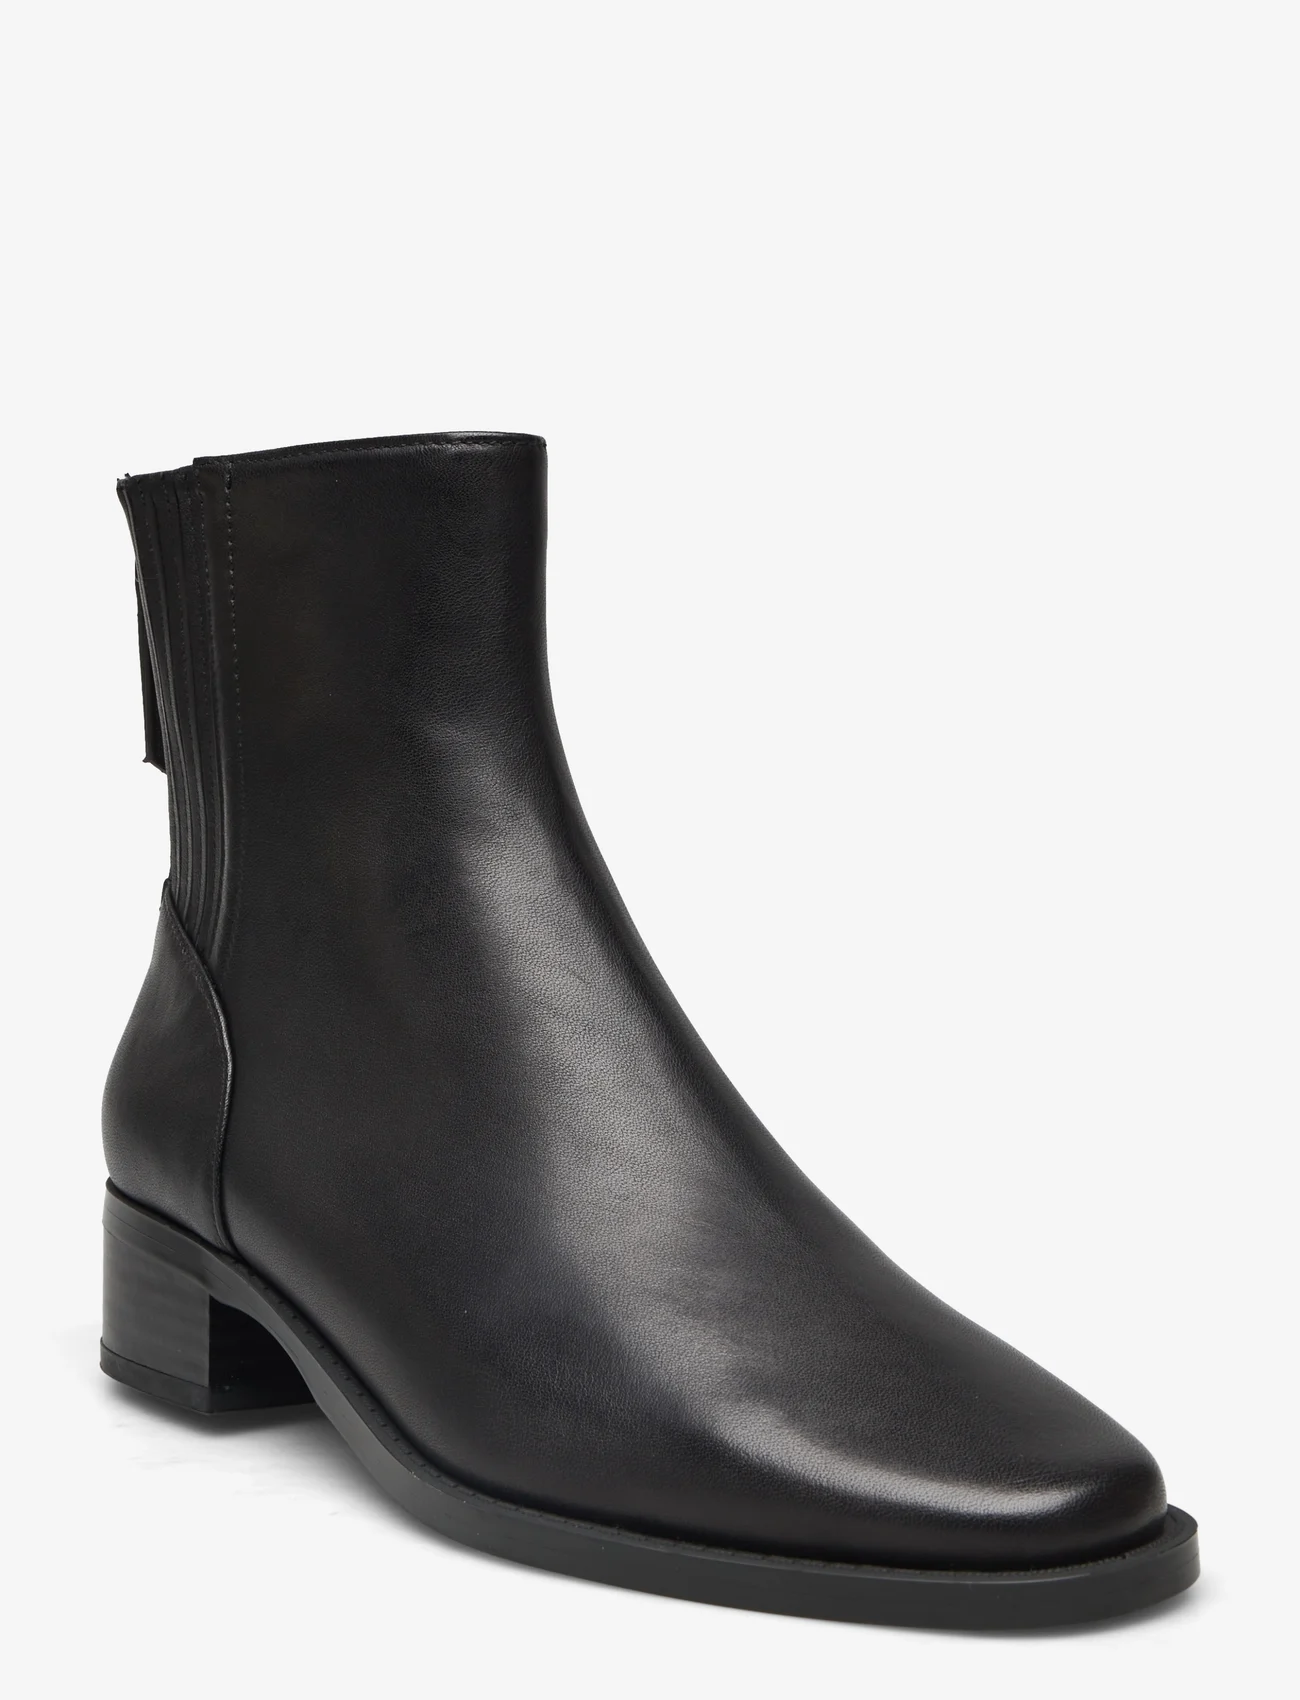 Mango - Leather ankle boots with ankle zip closure - høye hæler - black - 0